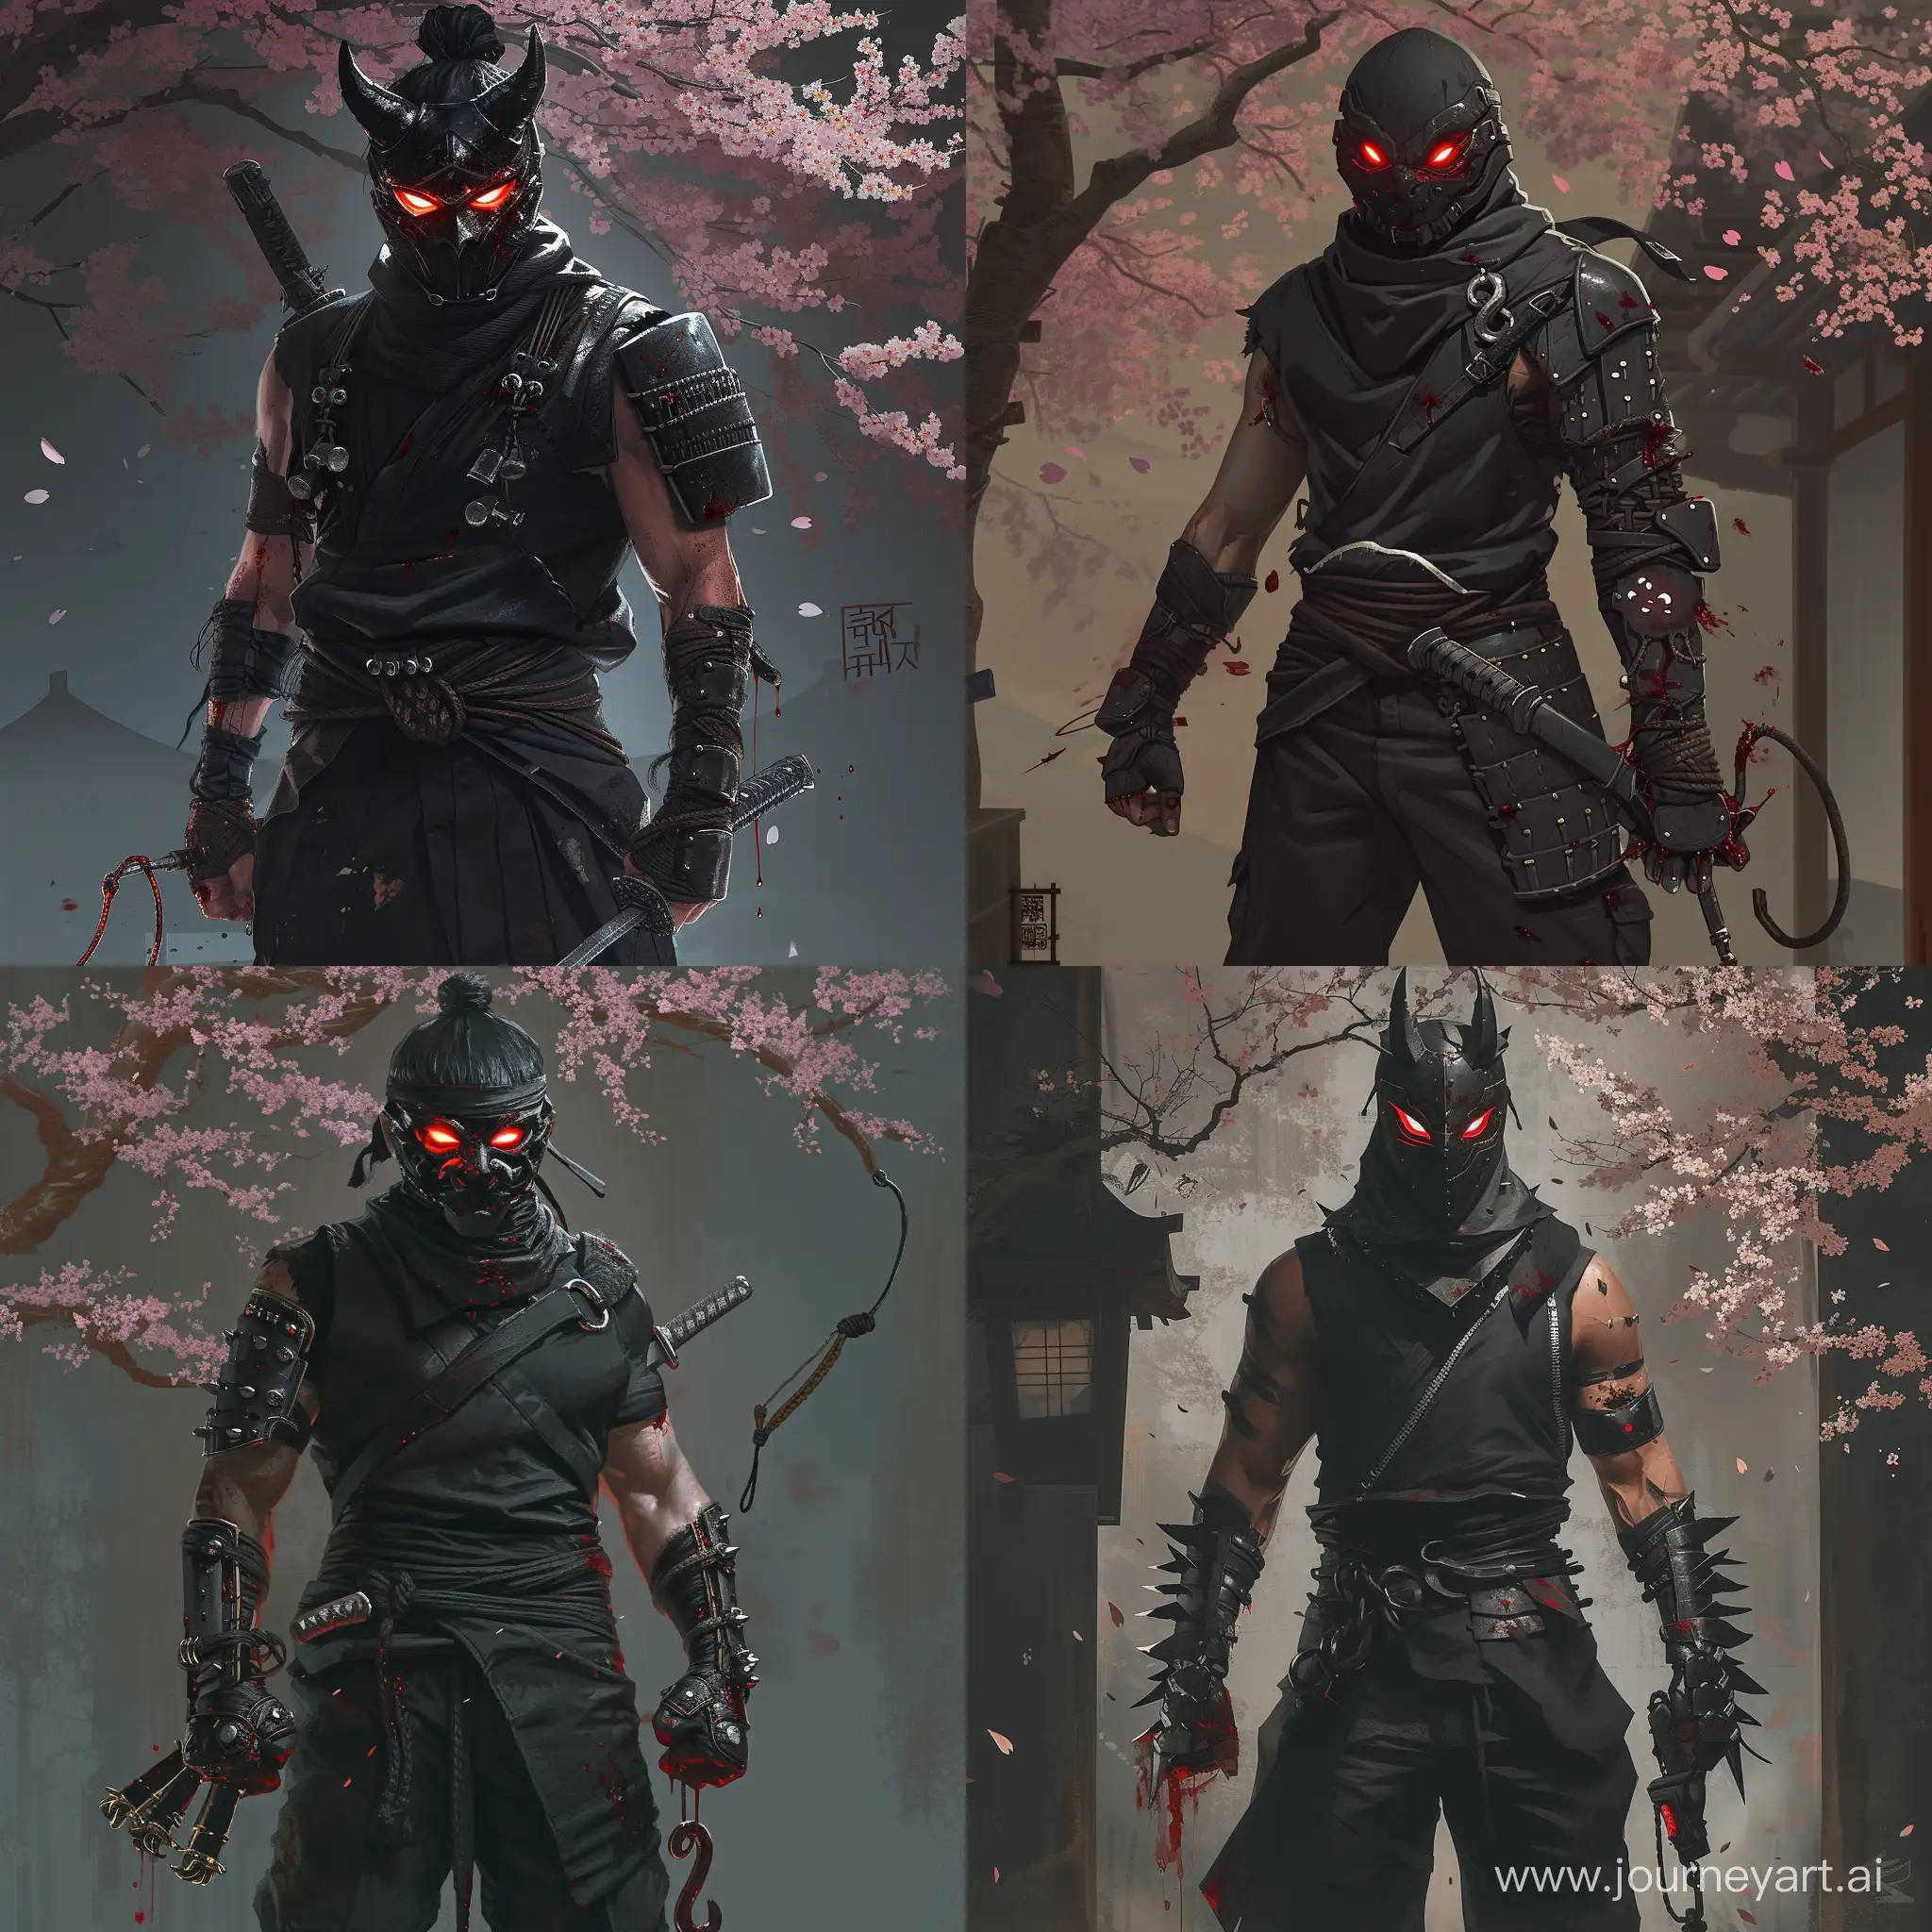 a MAN wearing a Sleek black shinobi shozoku with silver trim, Leather forearm guards with hidden blades, An oni shaped masked with glowing red eyes, Dark trousers and tabi boots for agile movement, A grappling hook attached to the waist wielding Leather gauntlets with built-in retractable kunai blades, japanese cherry blossom tree in the background, 1990's pixel art detailed, 1970 dark fantasy style, souls borne style, dark lighting, gritty, edgy, blood on weapon